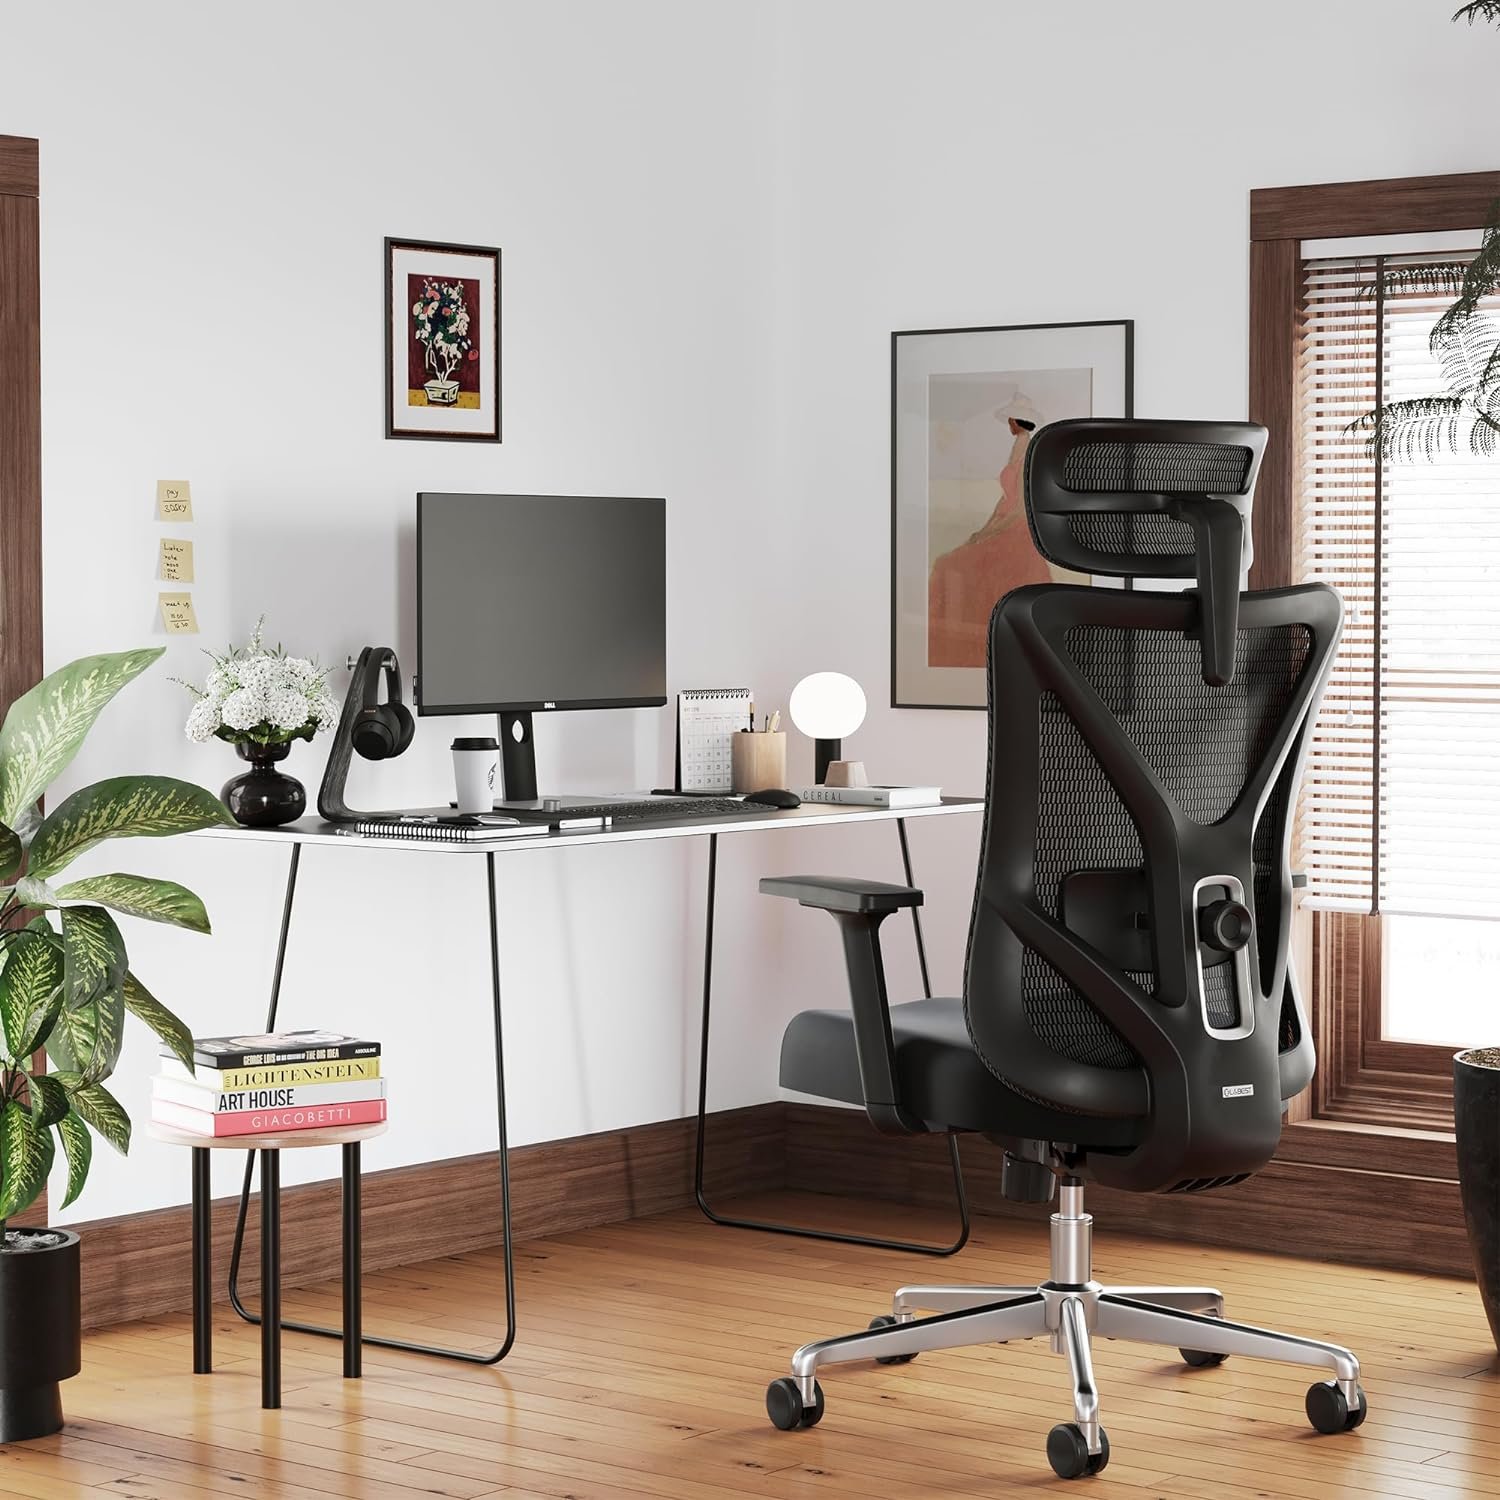 T23 Ergonomic Office Chair,Mesh Computer Desk Chairs with Adjustable Lumbar Support,Headrest,3-D Armrests,Swivel Wheels,Comfortable Home Office Desk Chairs for Long Hours,Rolling Gaming Chair